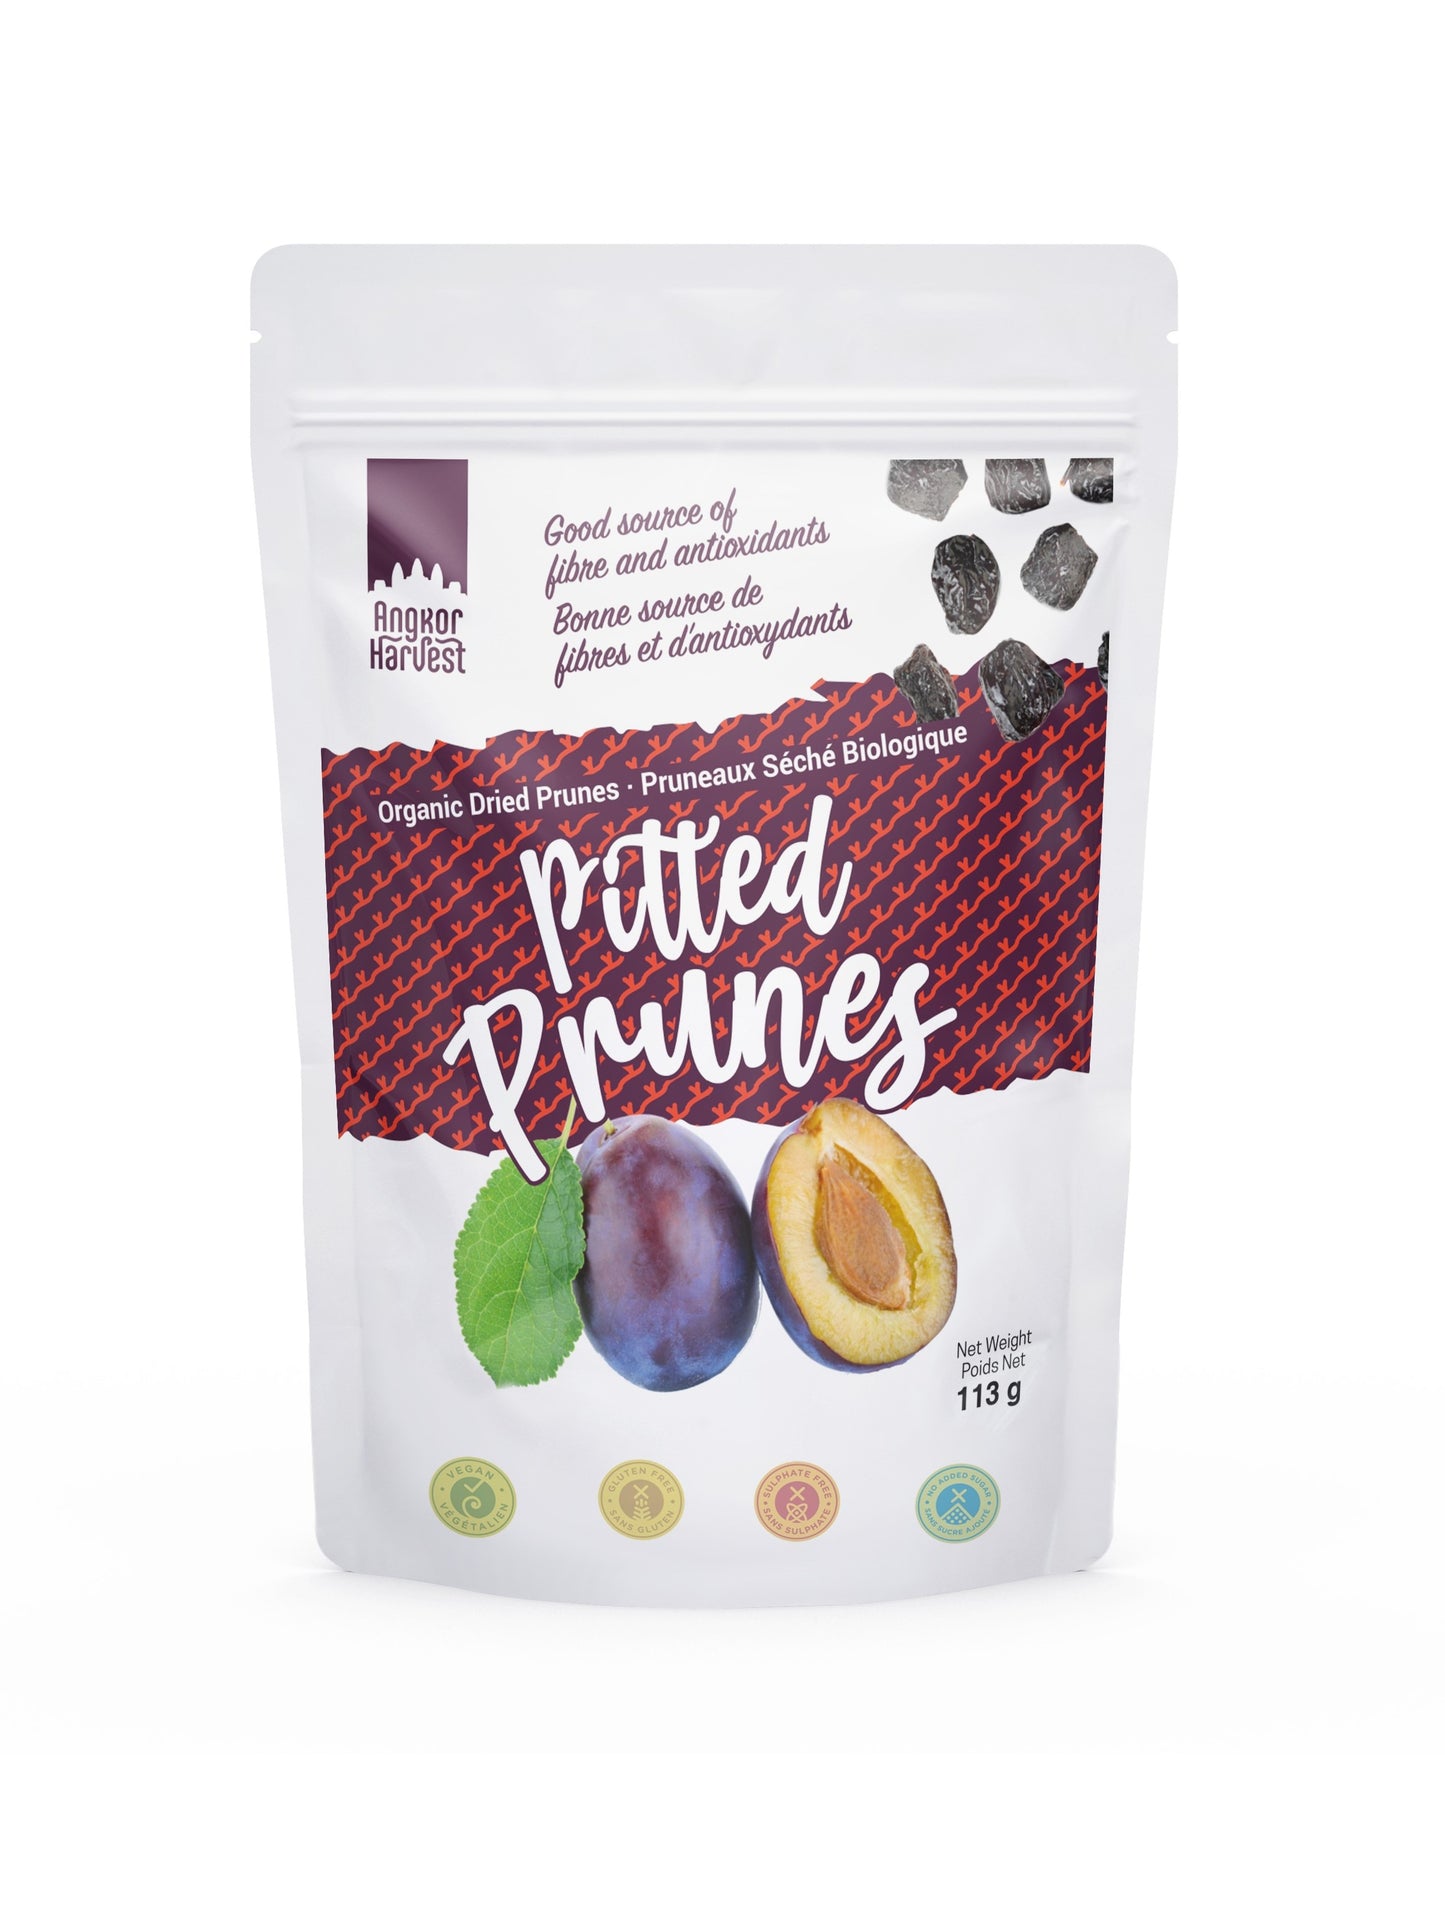 Organic Dried Prunes, pitted